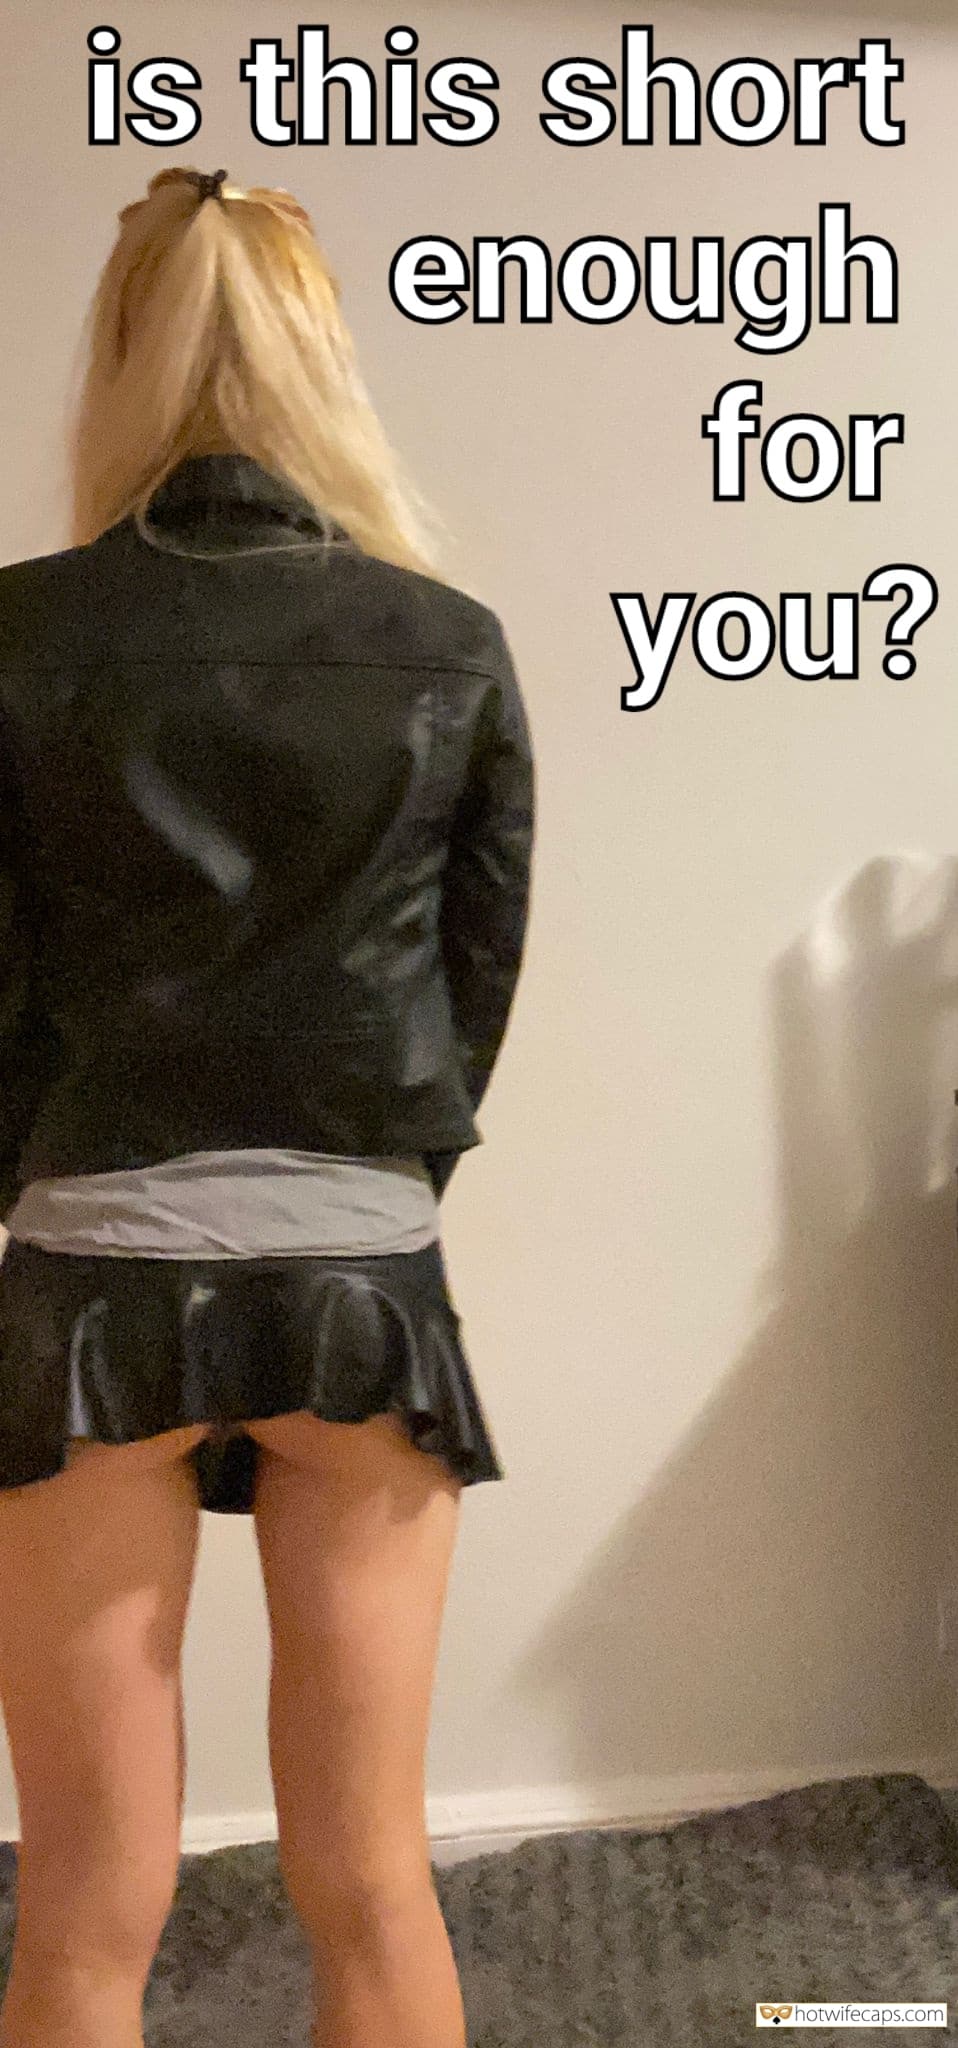 Latex Pussy Captions - Challenges and Rules, Dirty Talk, Getting Ready, No Panties Hotwife Caption  â„–561815: Petite blonde in latex mini skirt - no panties for easy access